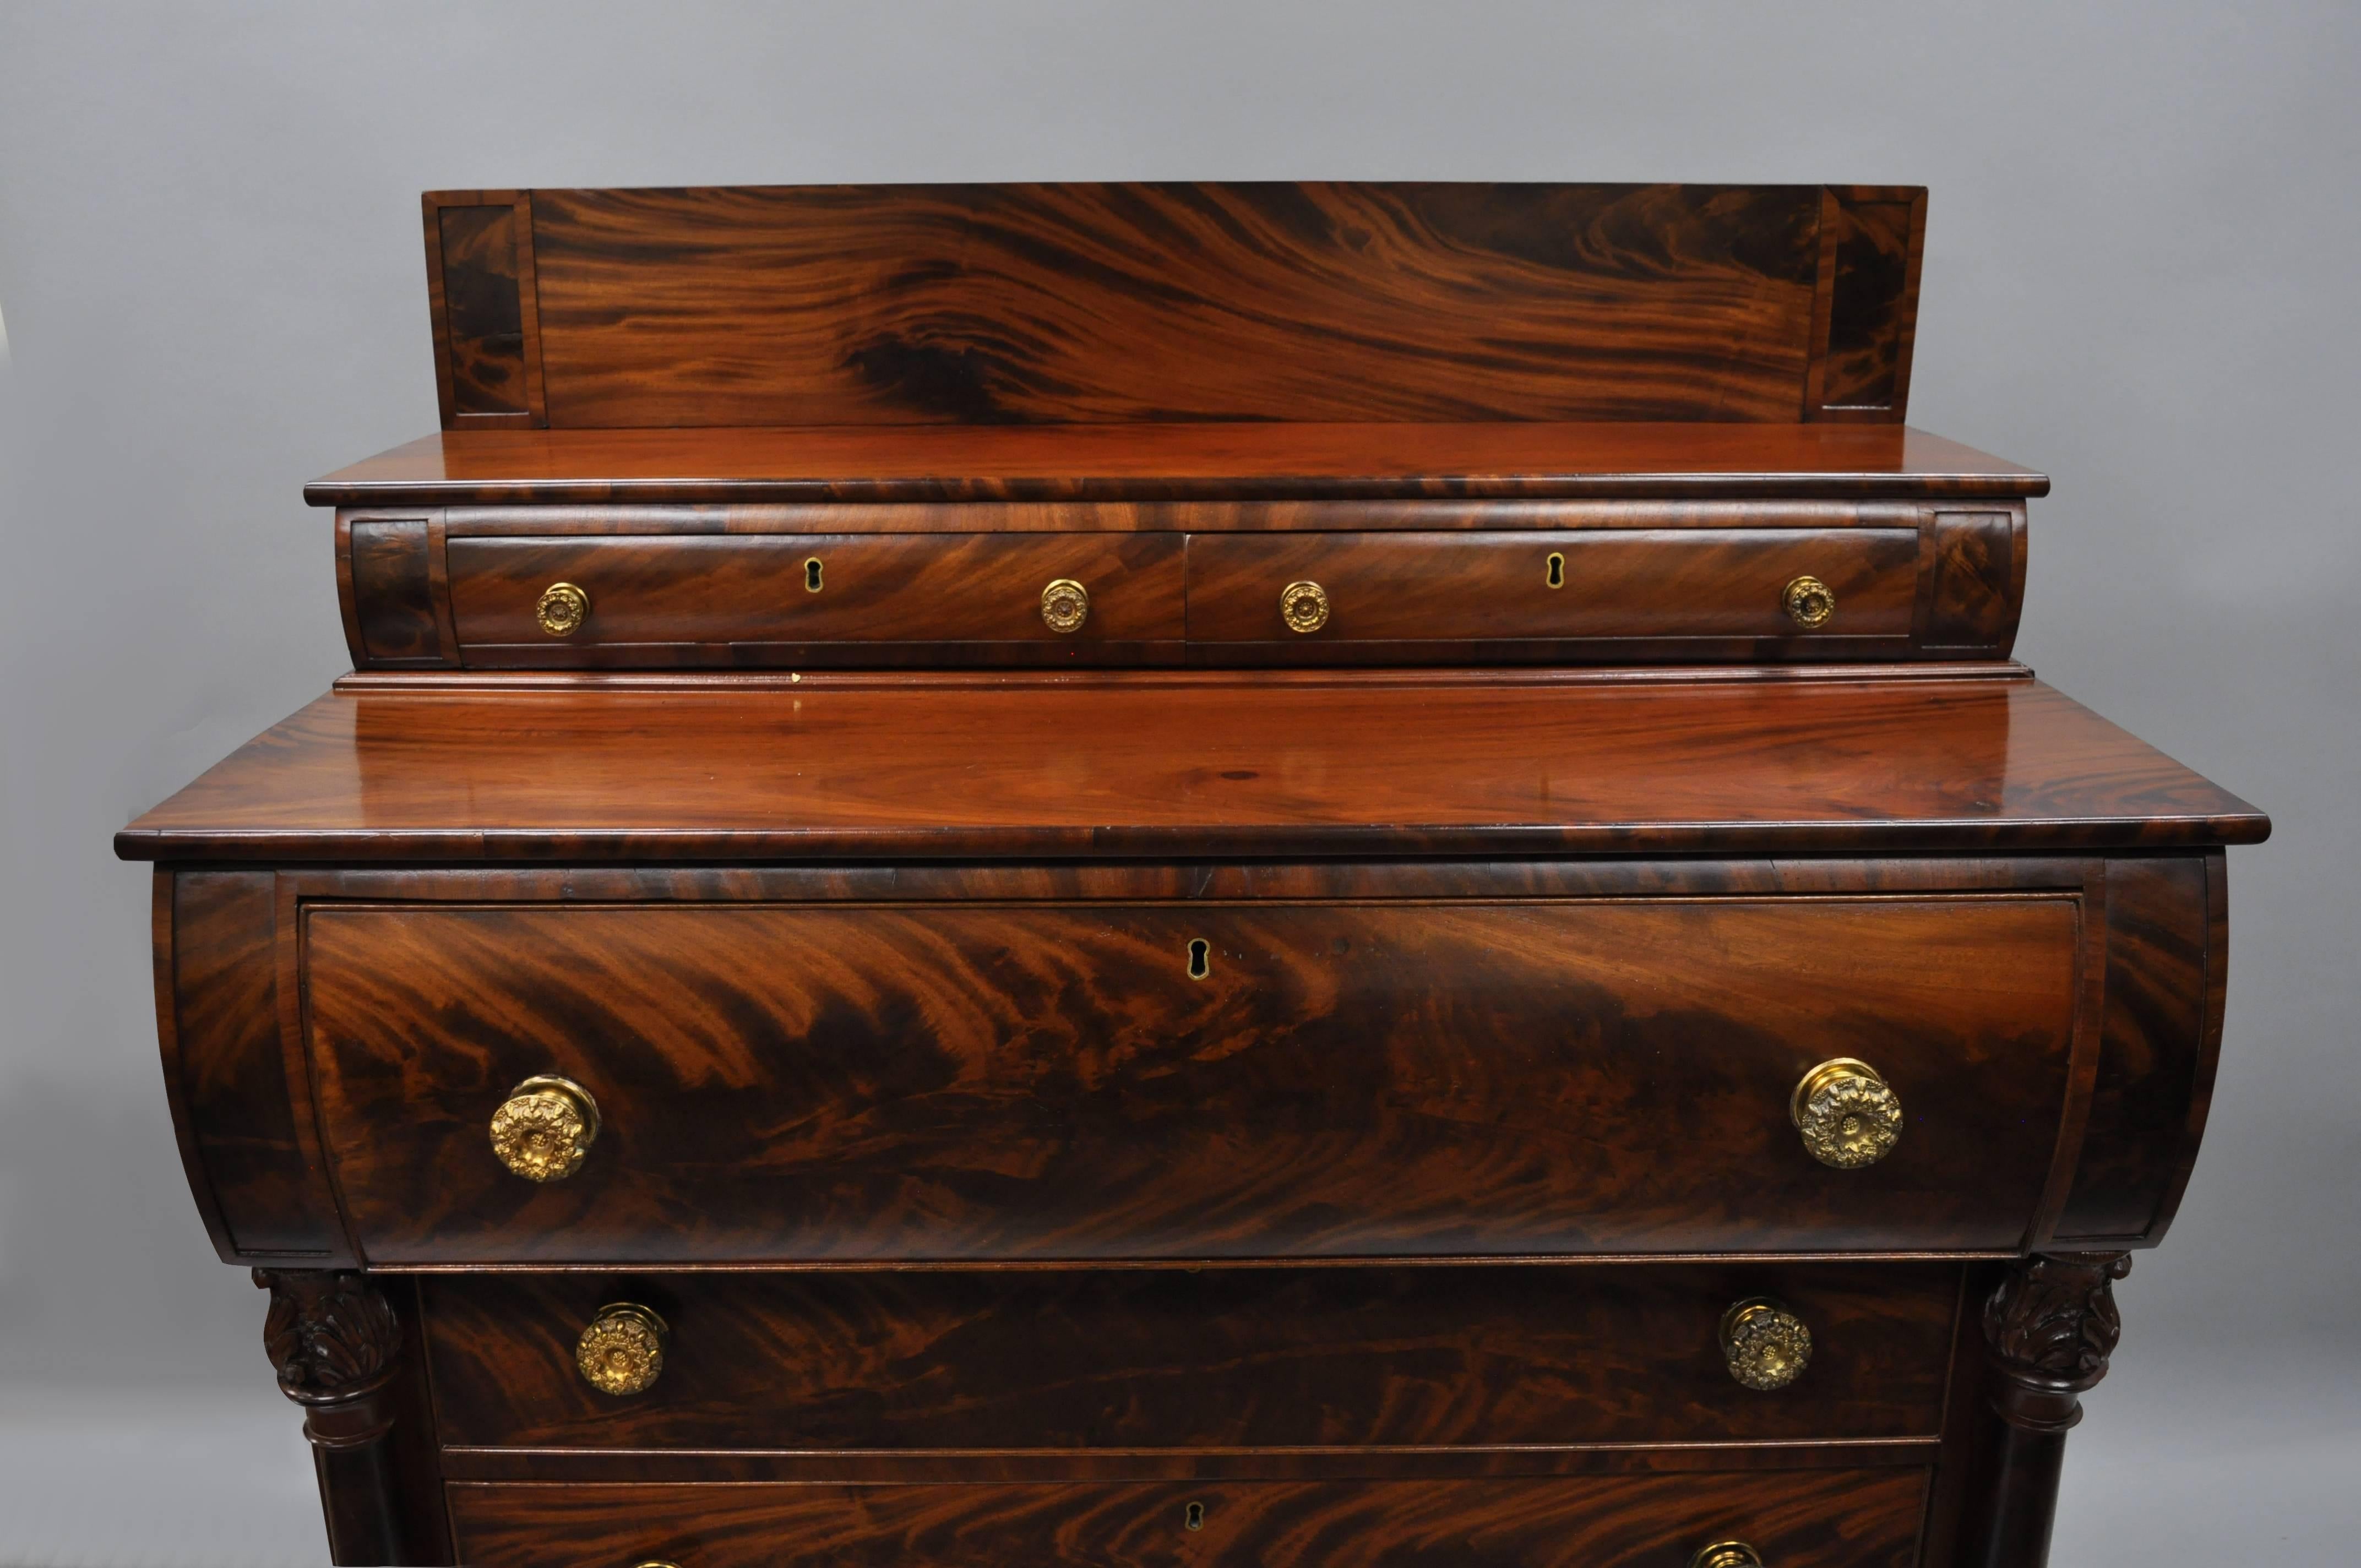 Antique American Empire crotch mahogany chest of drawers with paw feet, circa early to mid-1800s. Item features stunning crotch mahogany wood veneer, six drawers, carved paw feet, column supports, brass pulls, no key but unlocked, original owners